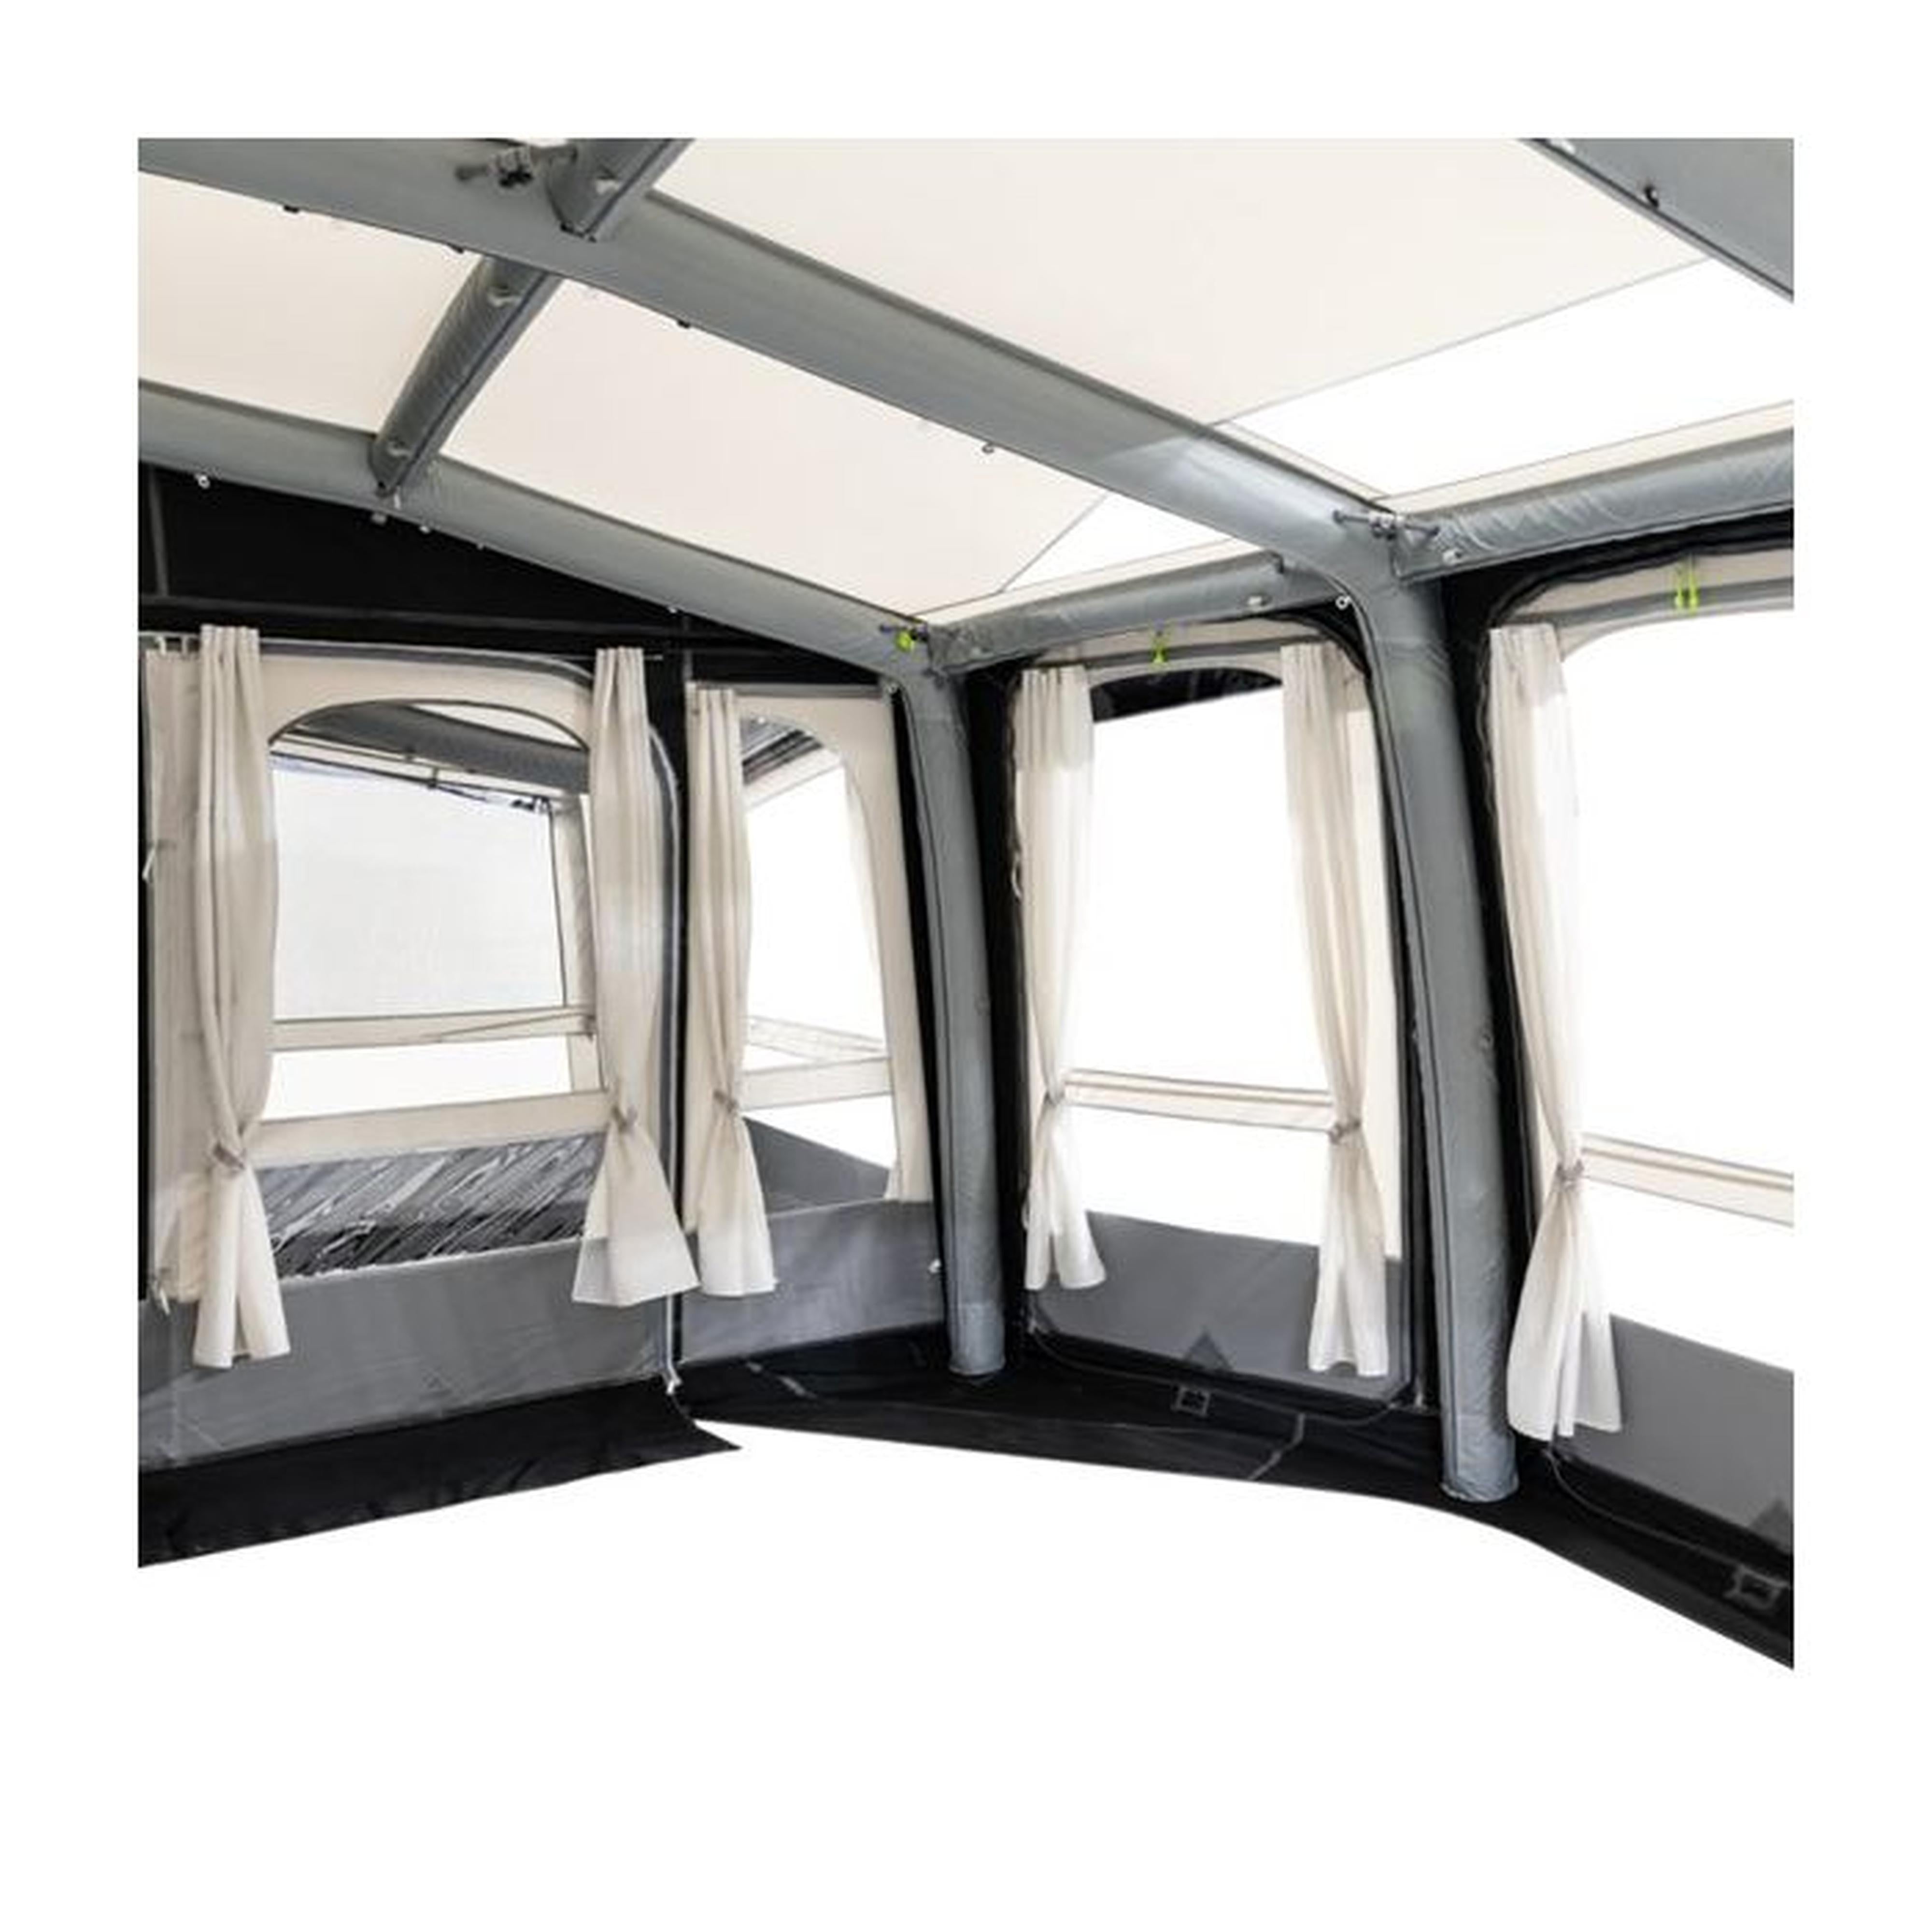 Dometic Ace Air Pro 400 S Awning 2022 Model - inside view